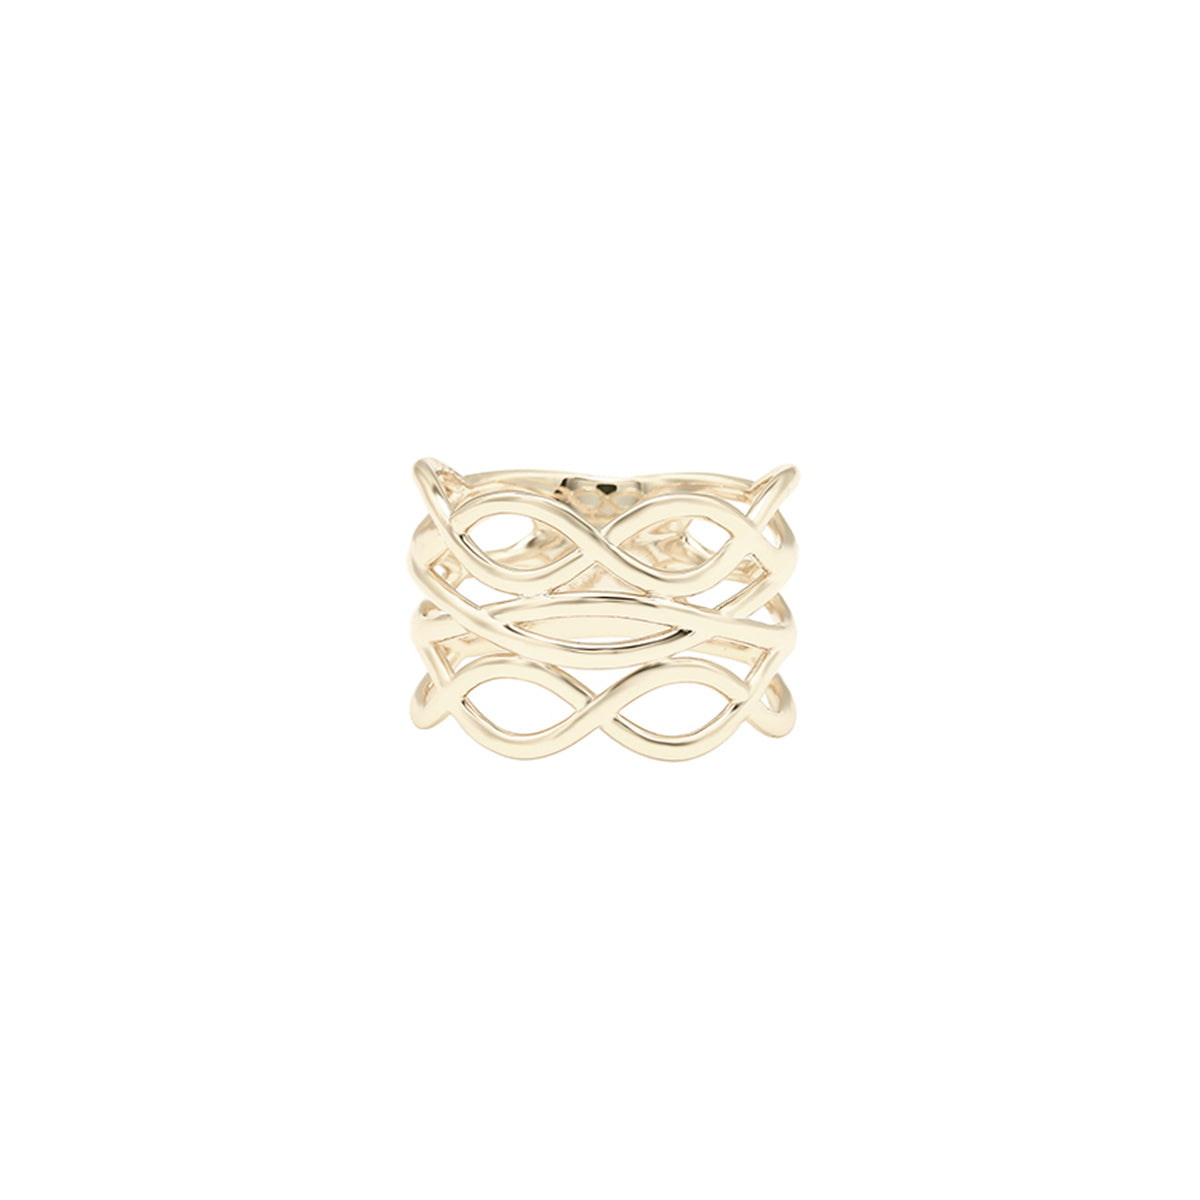 natalie wood designs gold bloom ring sized. 